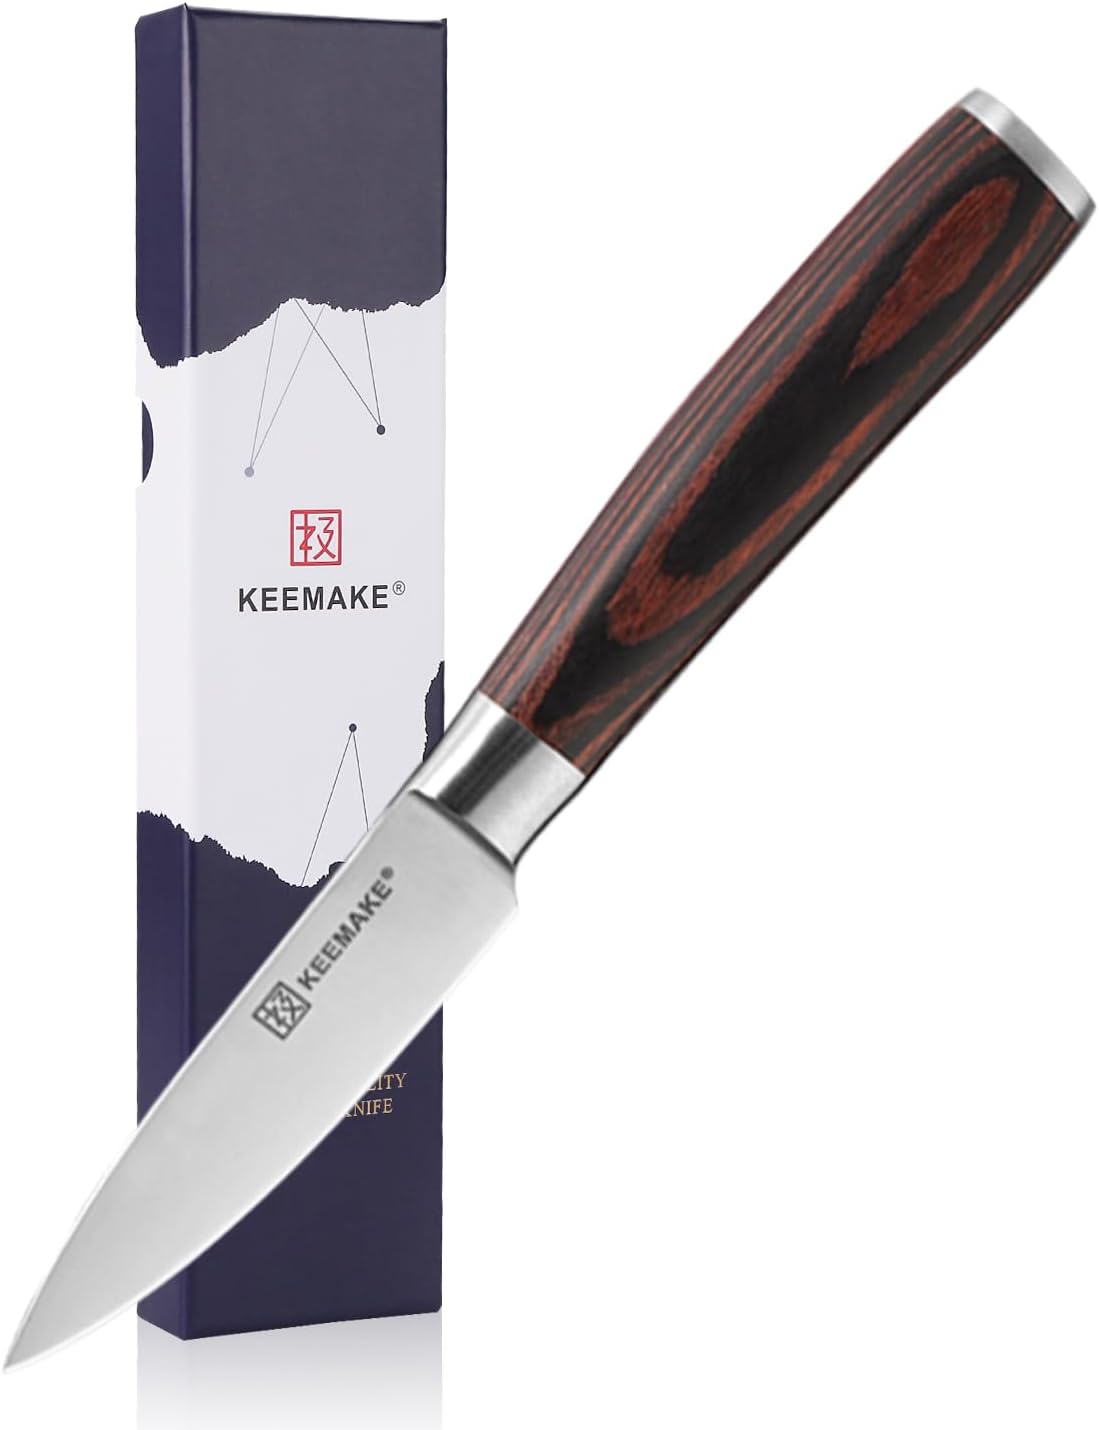 KEEMAKE Paring Knife 3.5 inch, Fruit Knife with German High Carbon Stainless Steel 1.4116 Pairing Knife with Pakkawood Handle